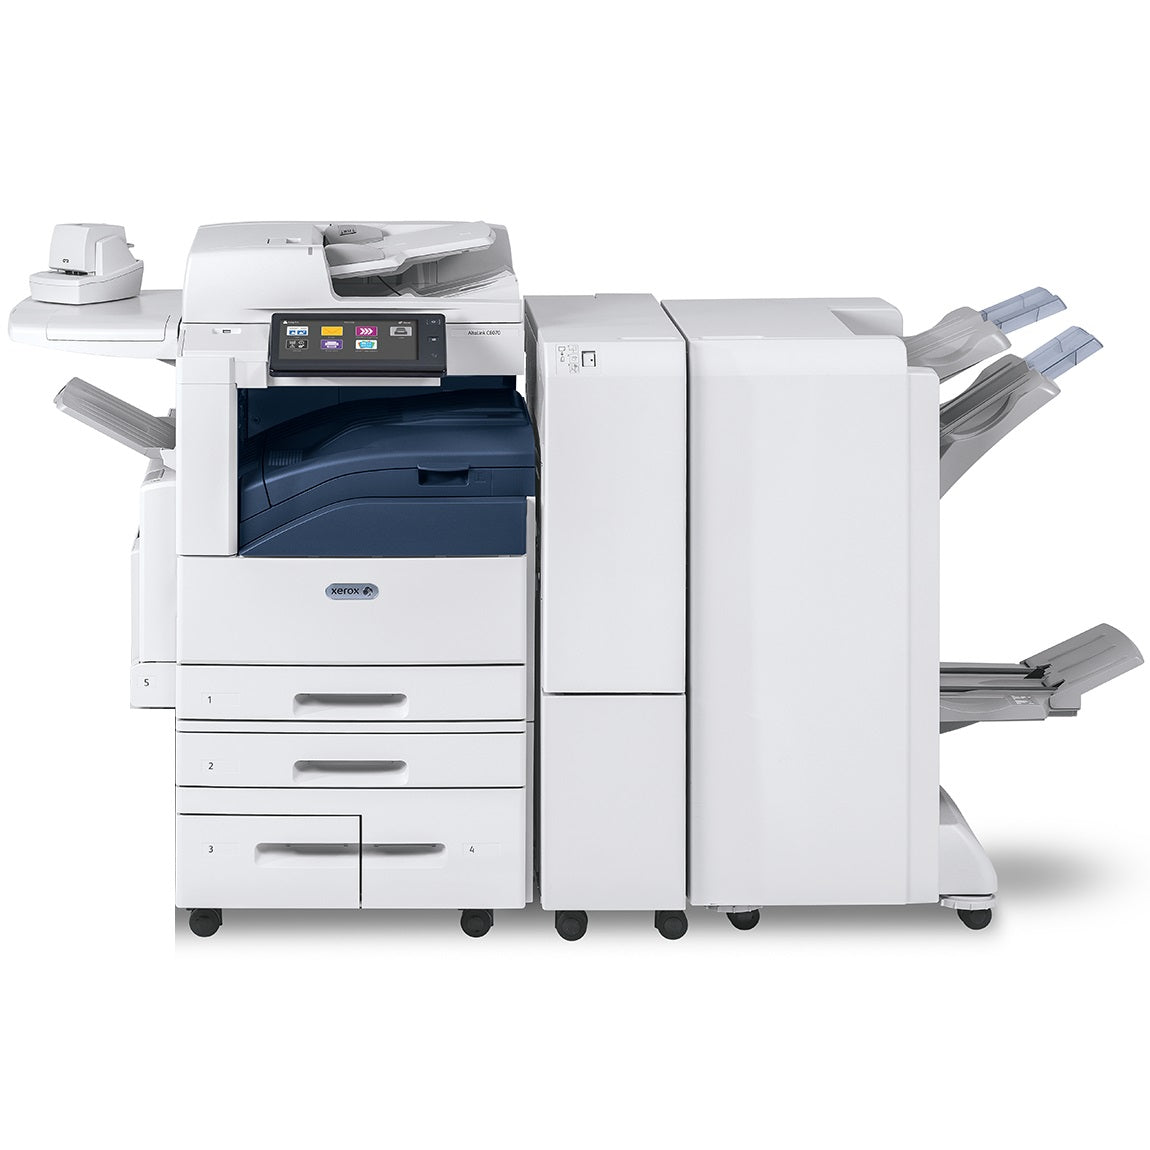 Xerox Altalink C8030 All-In-One Color Laser Printer With Booklet Maker/Stapler/C/Z Fold Module And Envelop Tray